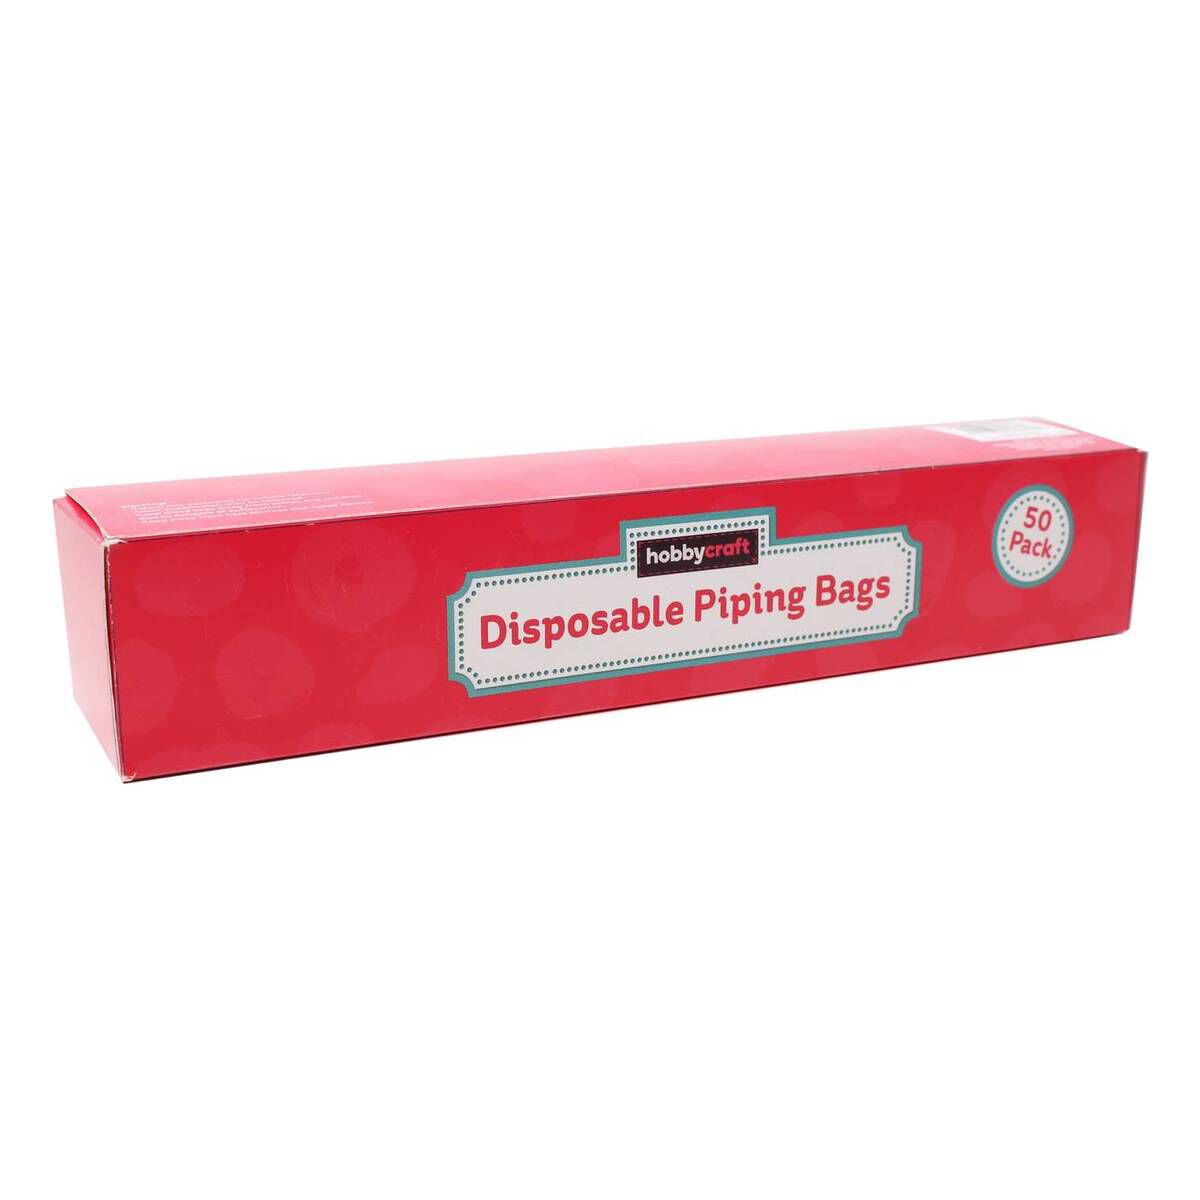 Lakeland Get a Grip Disposable Piping & Icing Bags on a Roll x 50 by Lakeland 